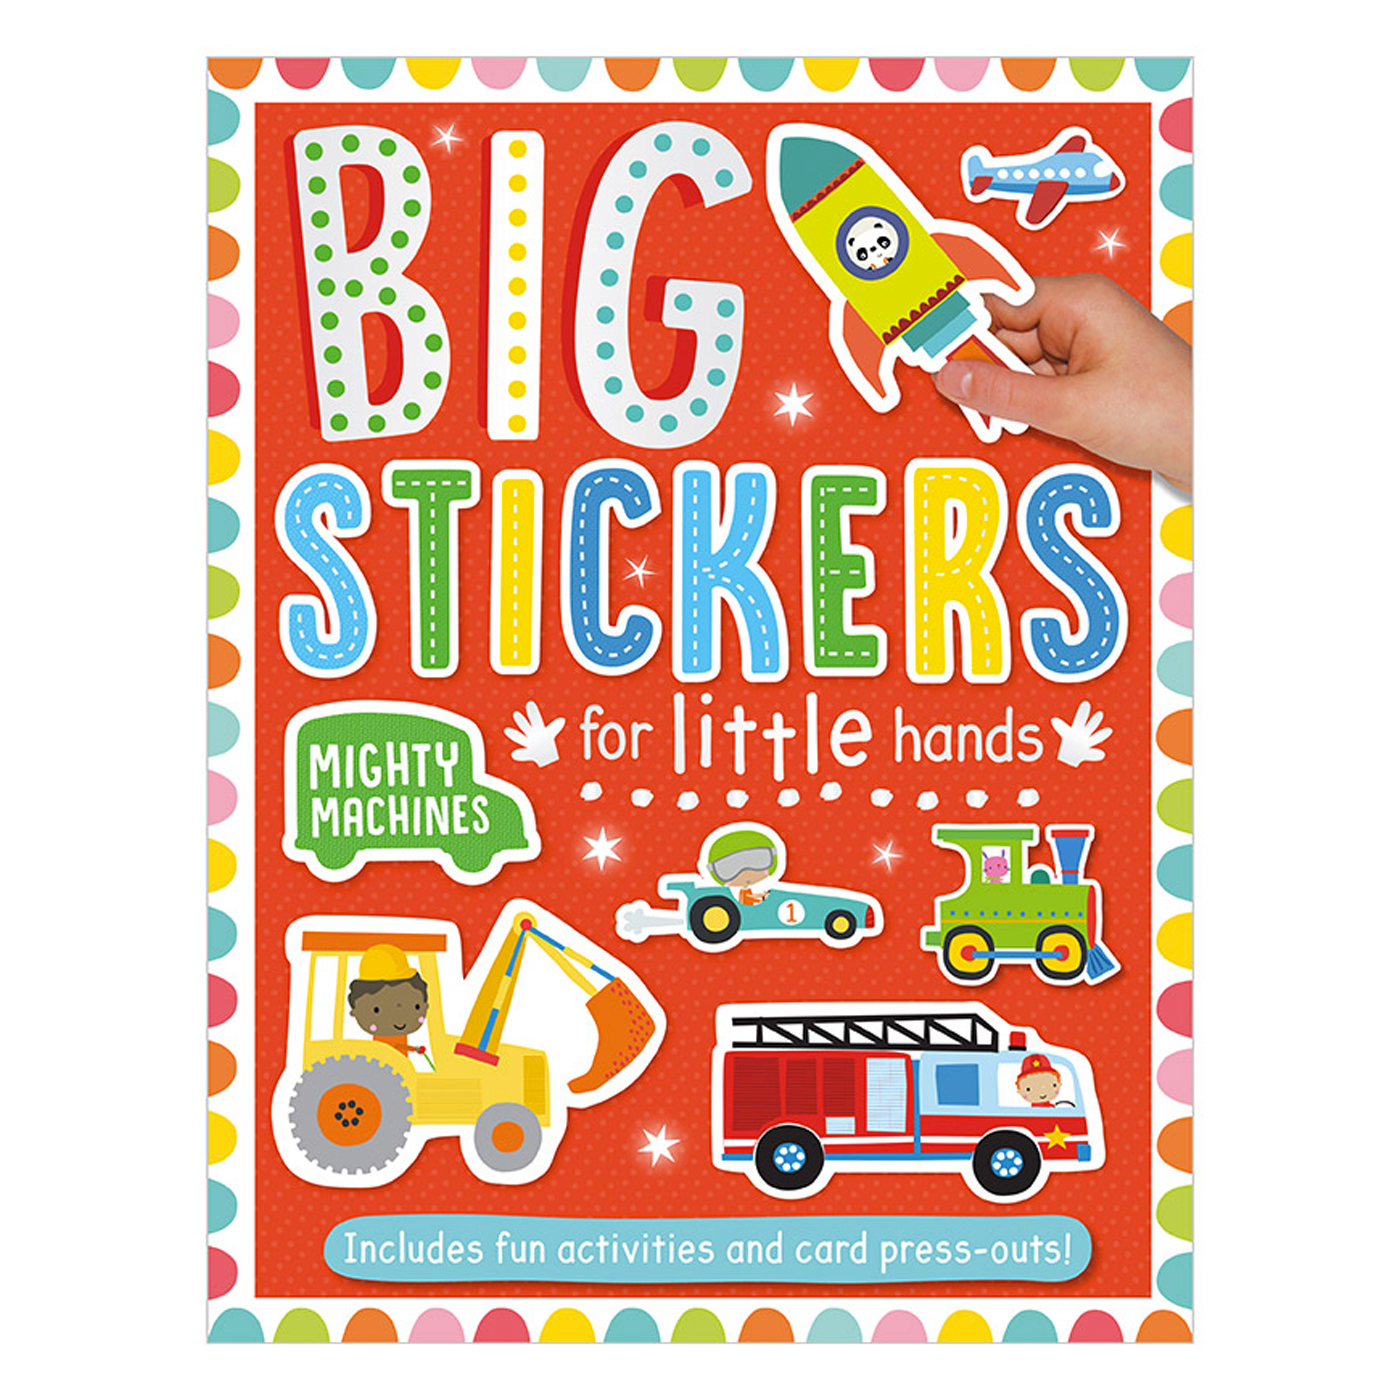  Big Stickers for Little Hands Mighty Machines